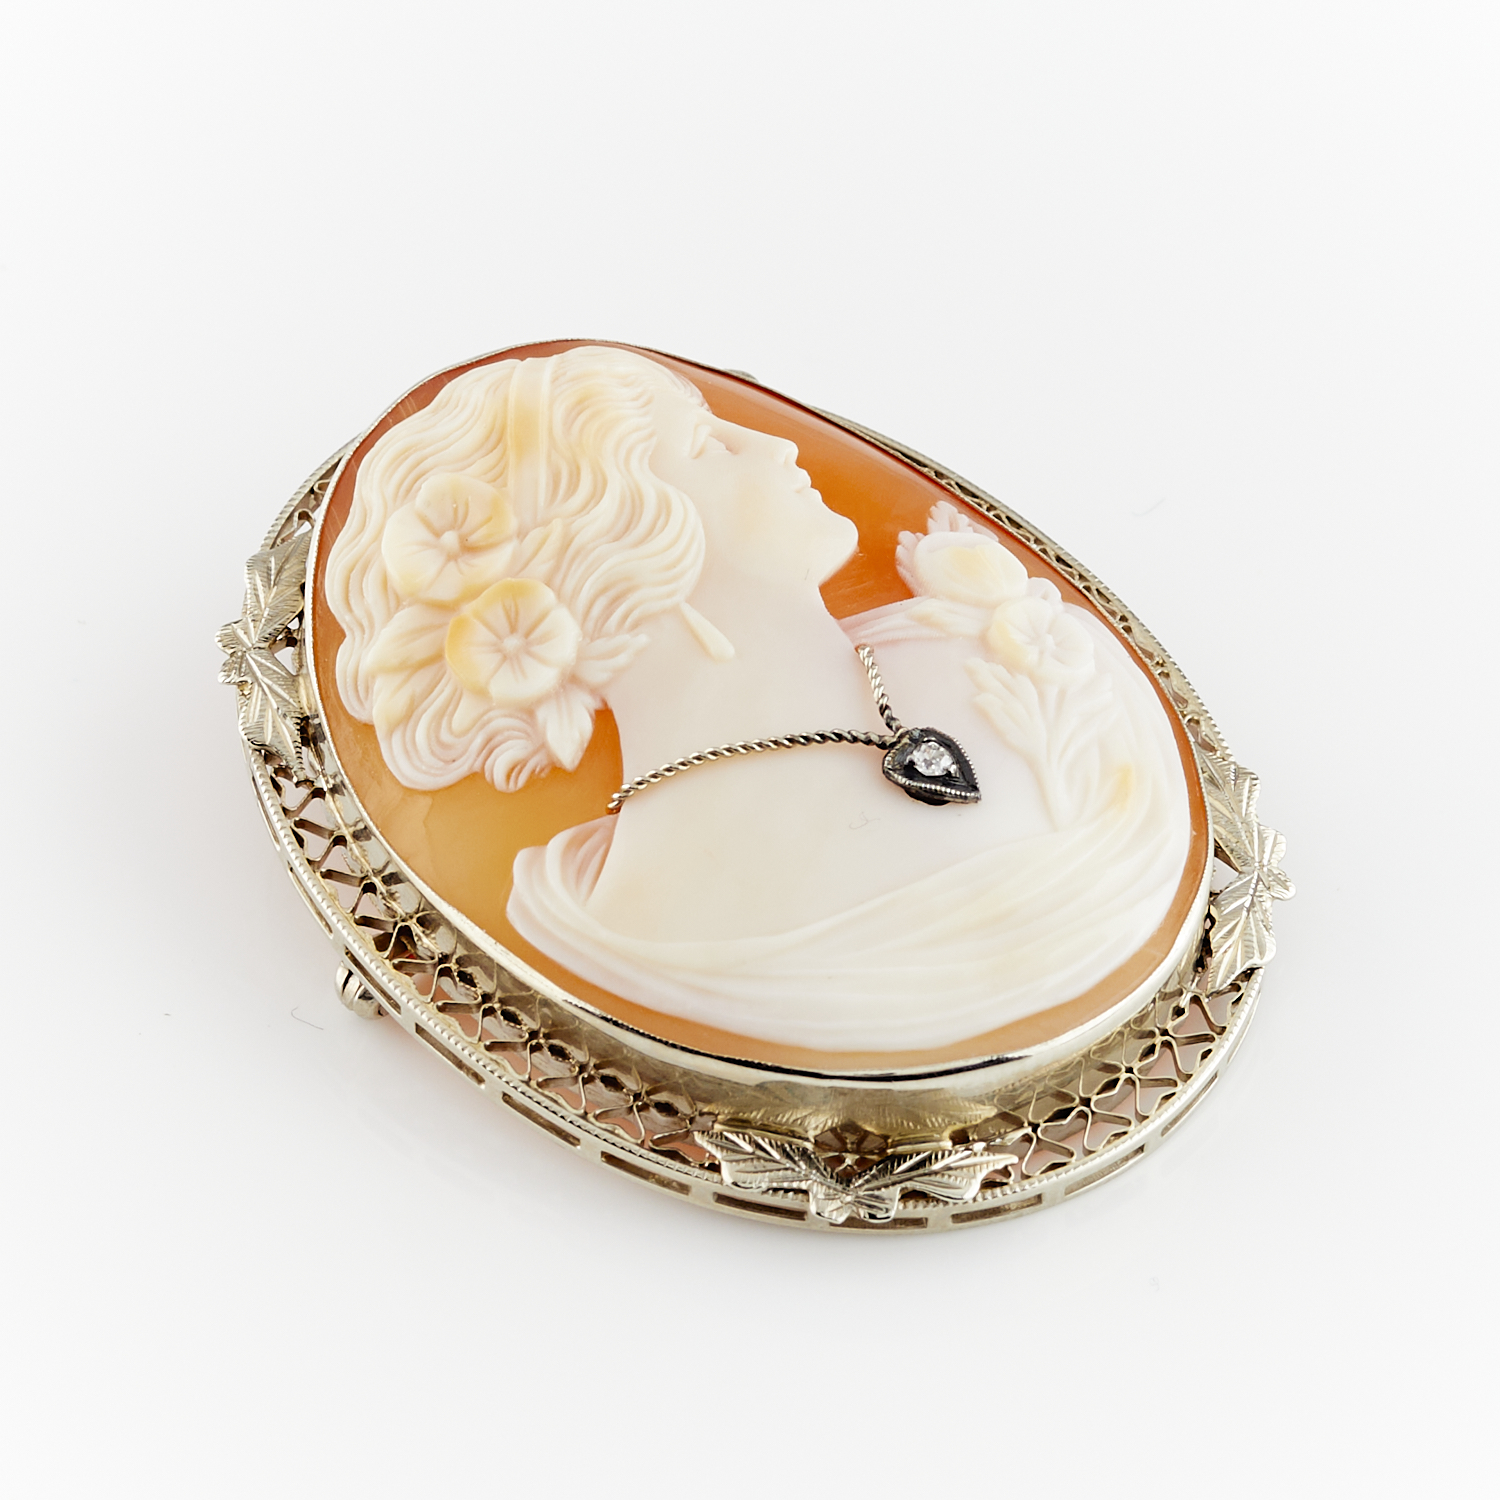 14k White Gold Cameo Habille Brooch with Diamond - Image 5 of 7